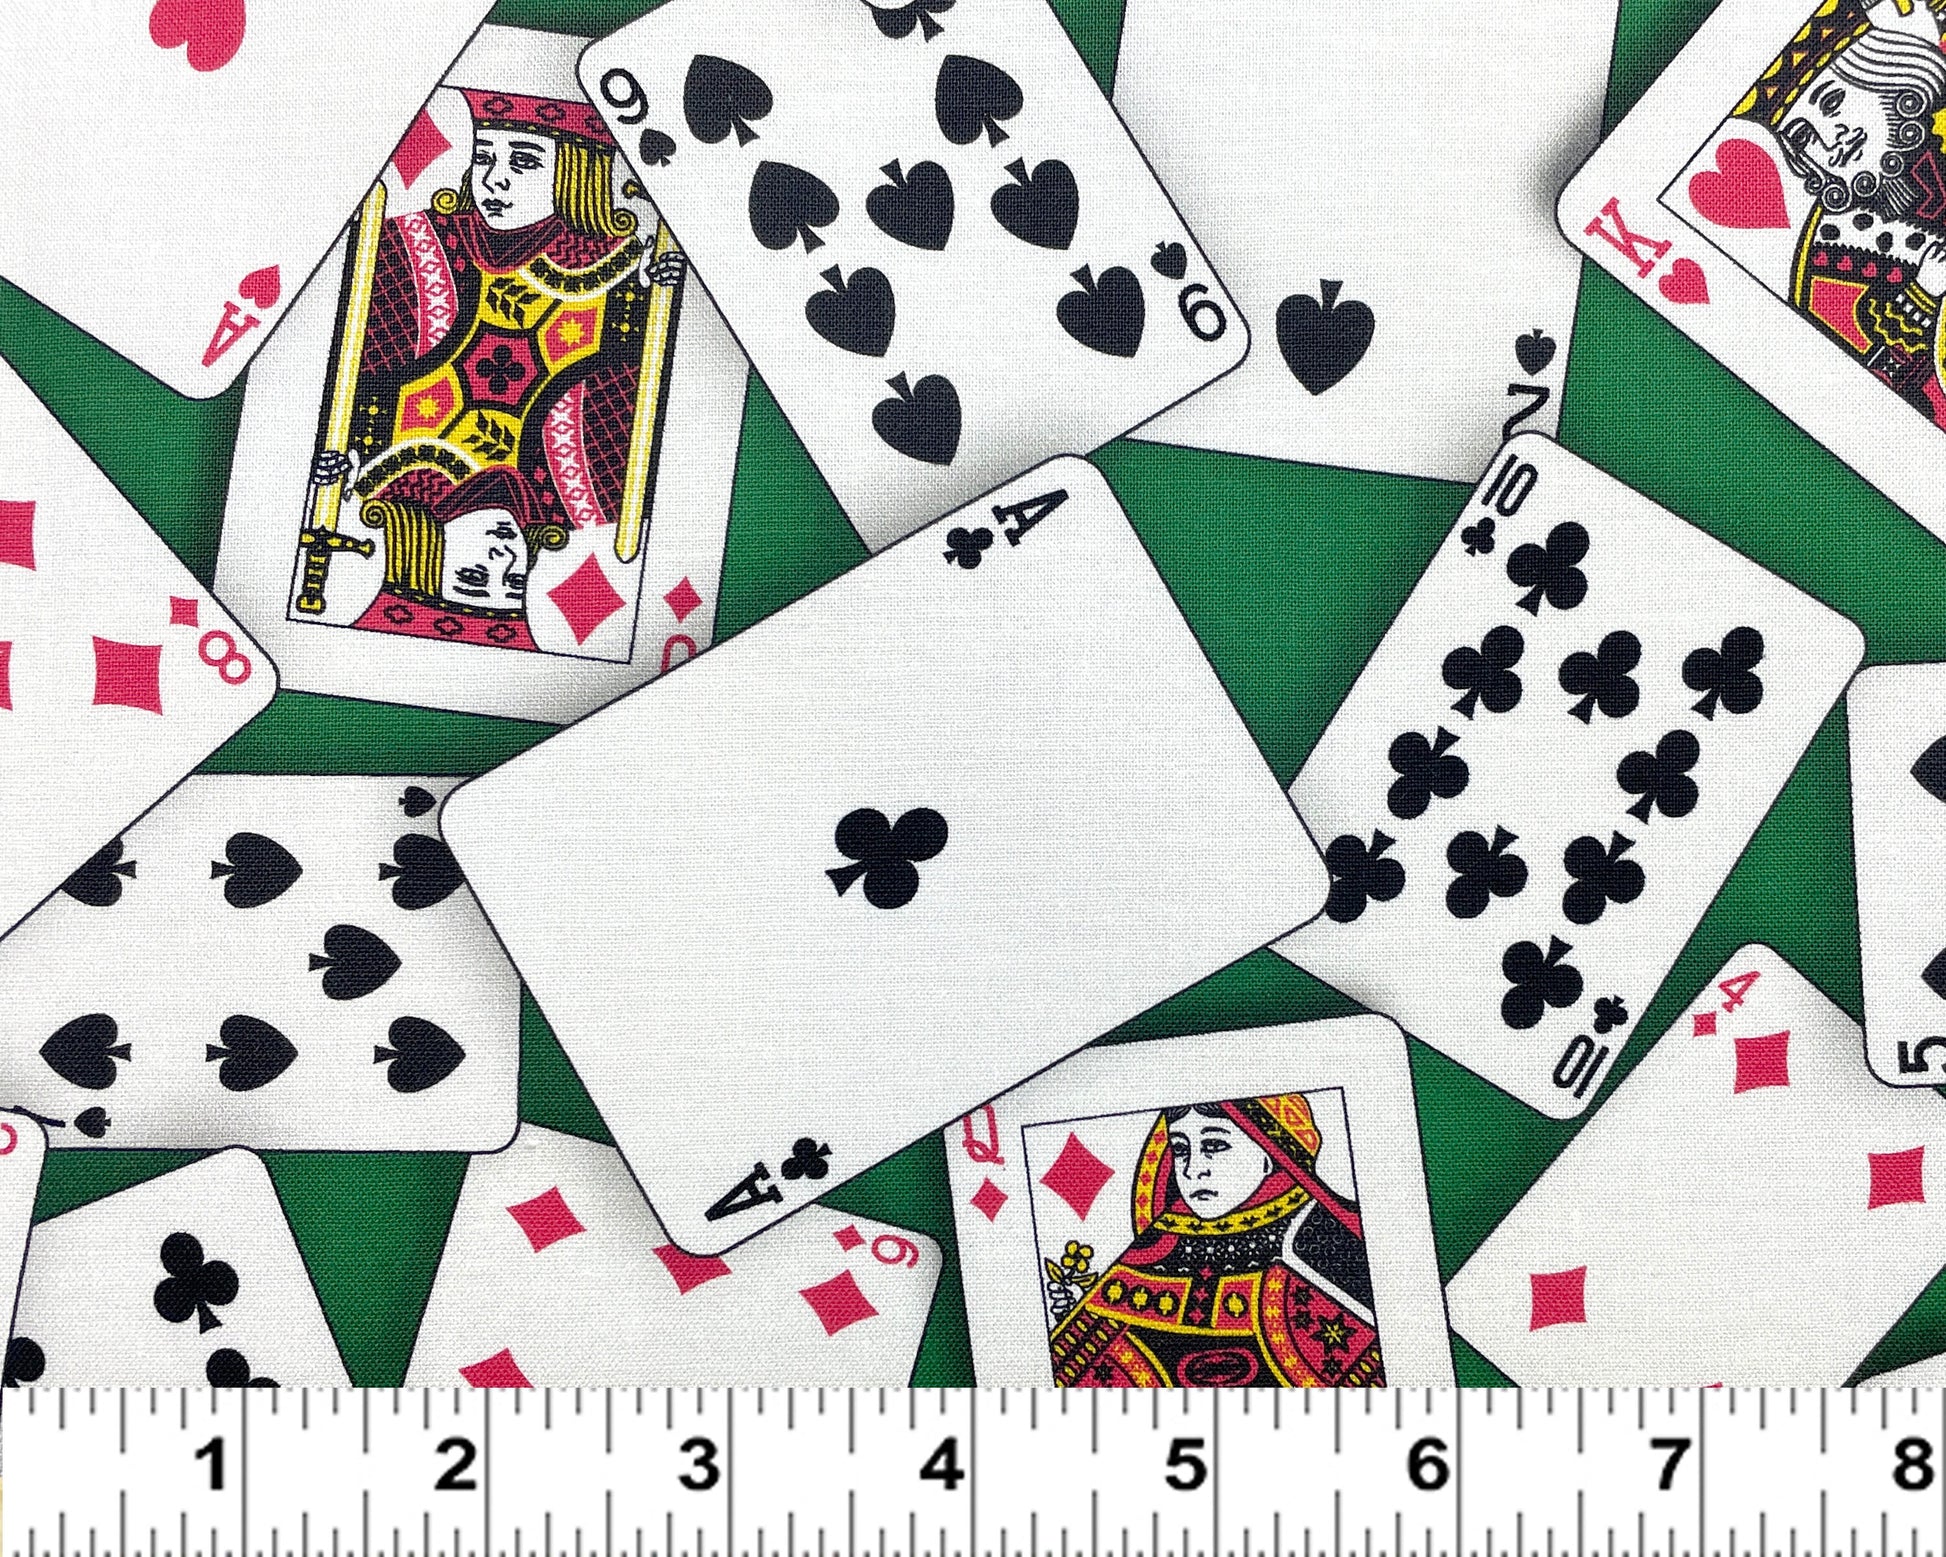 Playing Cards fabric by the yard - 100% cotton fabric - Poker material Card fabric Game print Game Night theme - SHIPS NEXT DAY